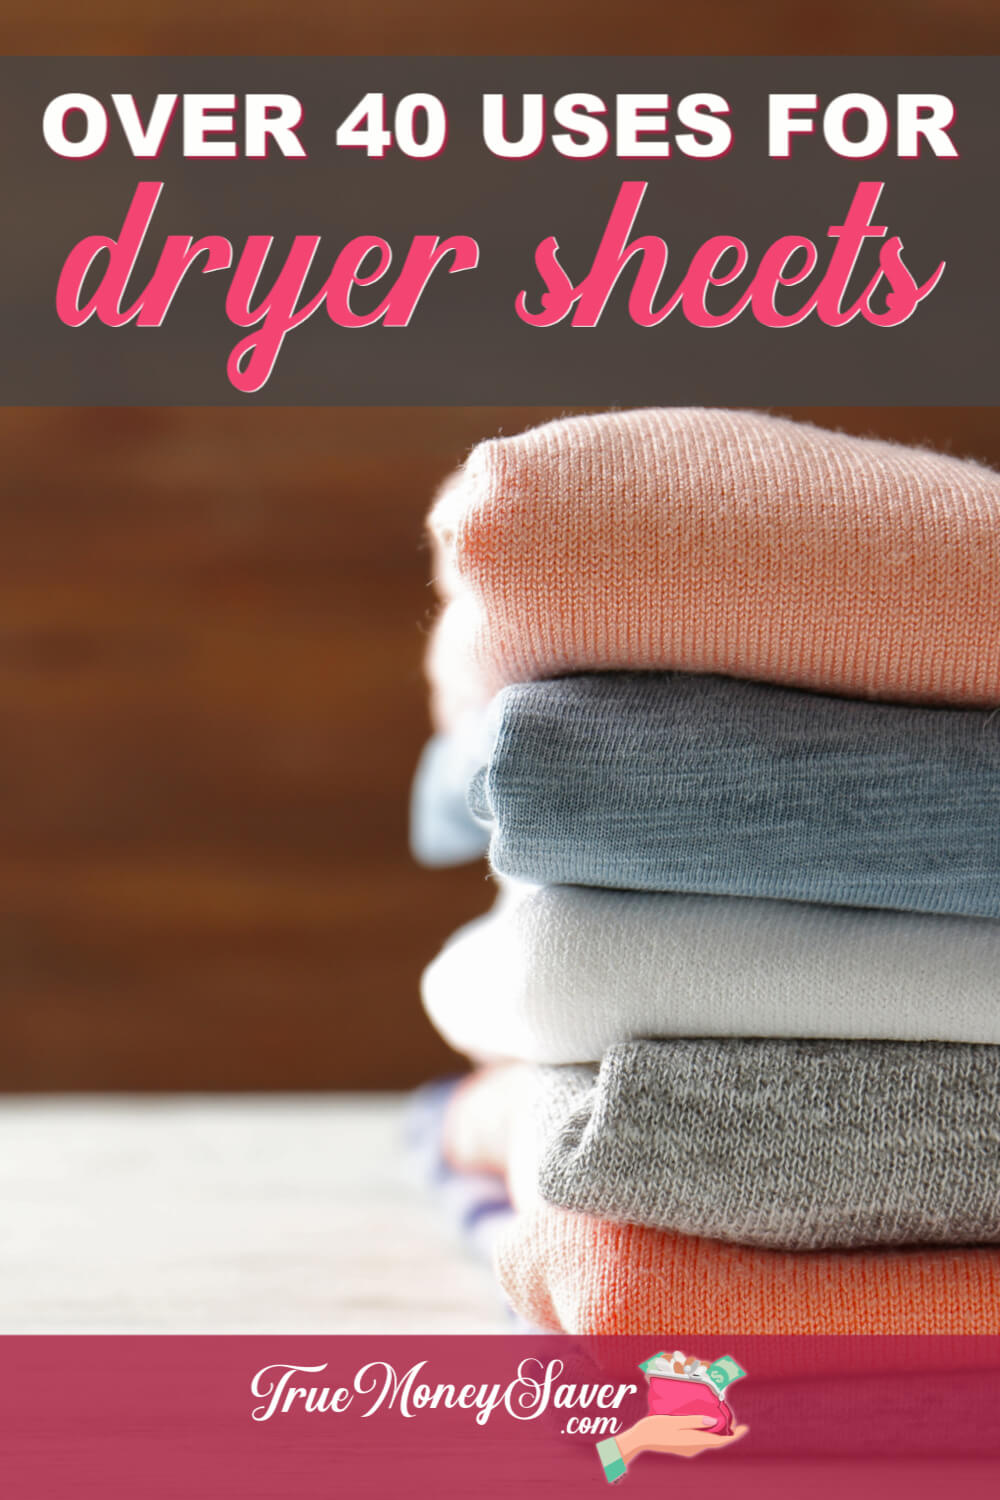 Over 40 Other Uses For Dryer Sheets That You Need To Know